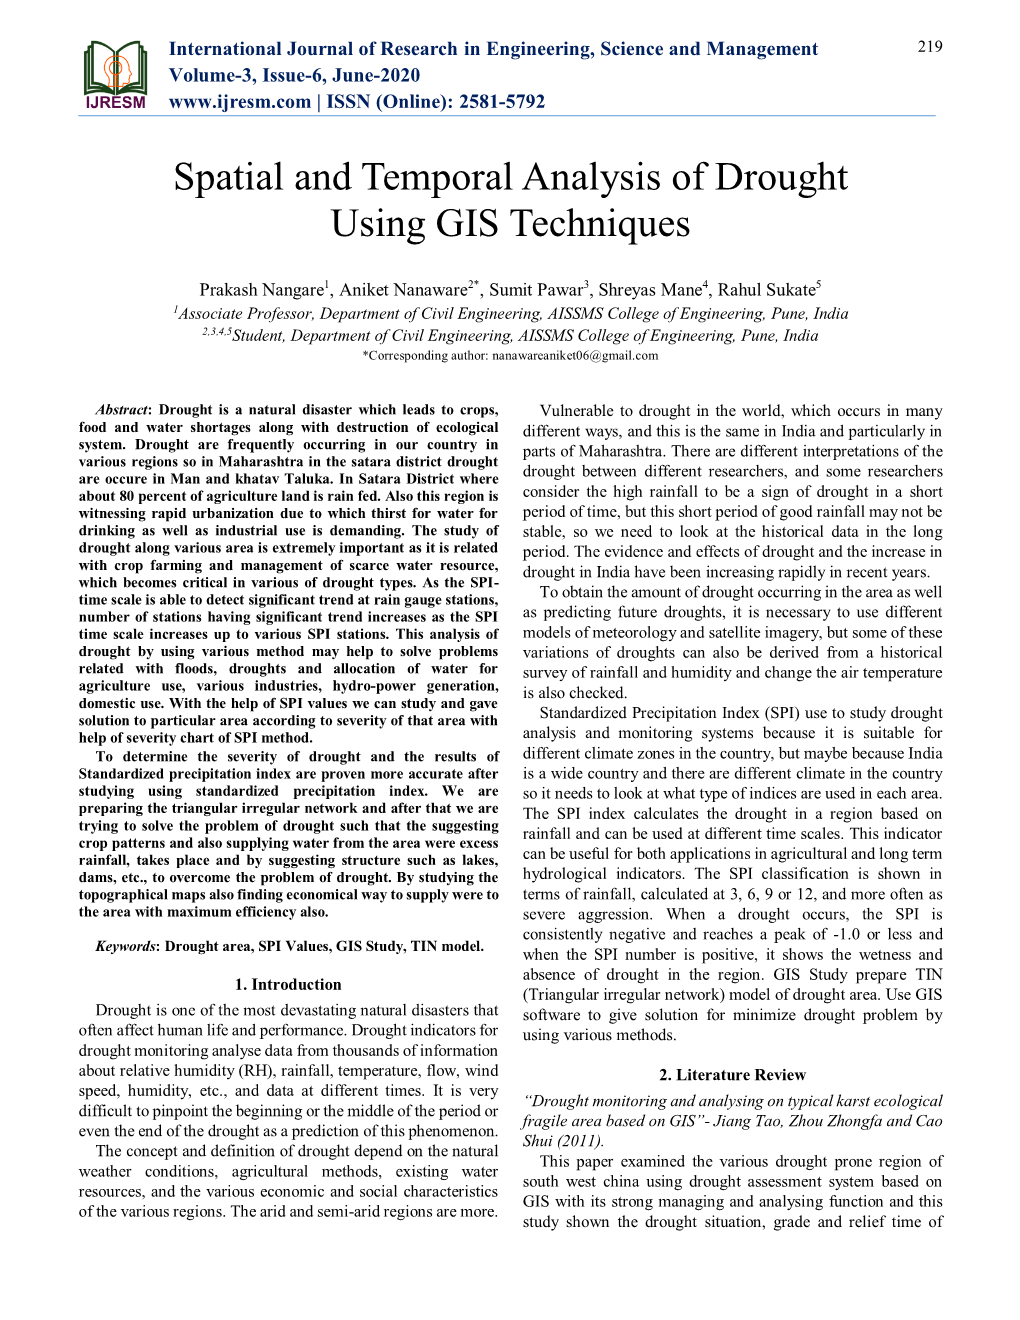 Spatial and Temporal Analysis of Drought Using GIS Techniques